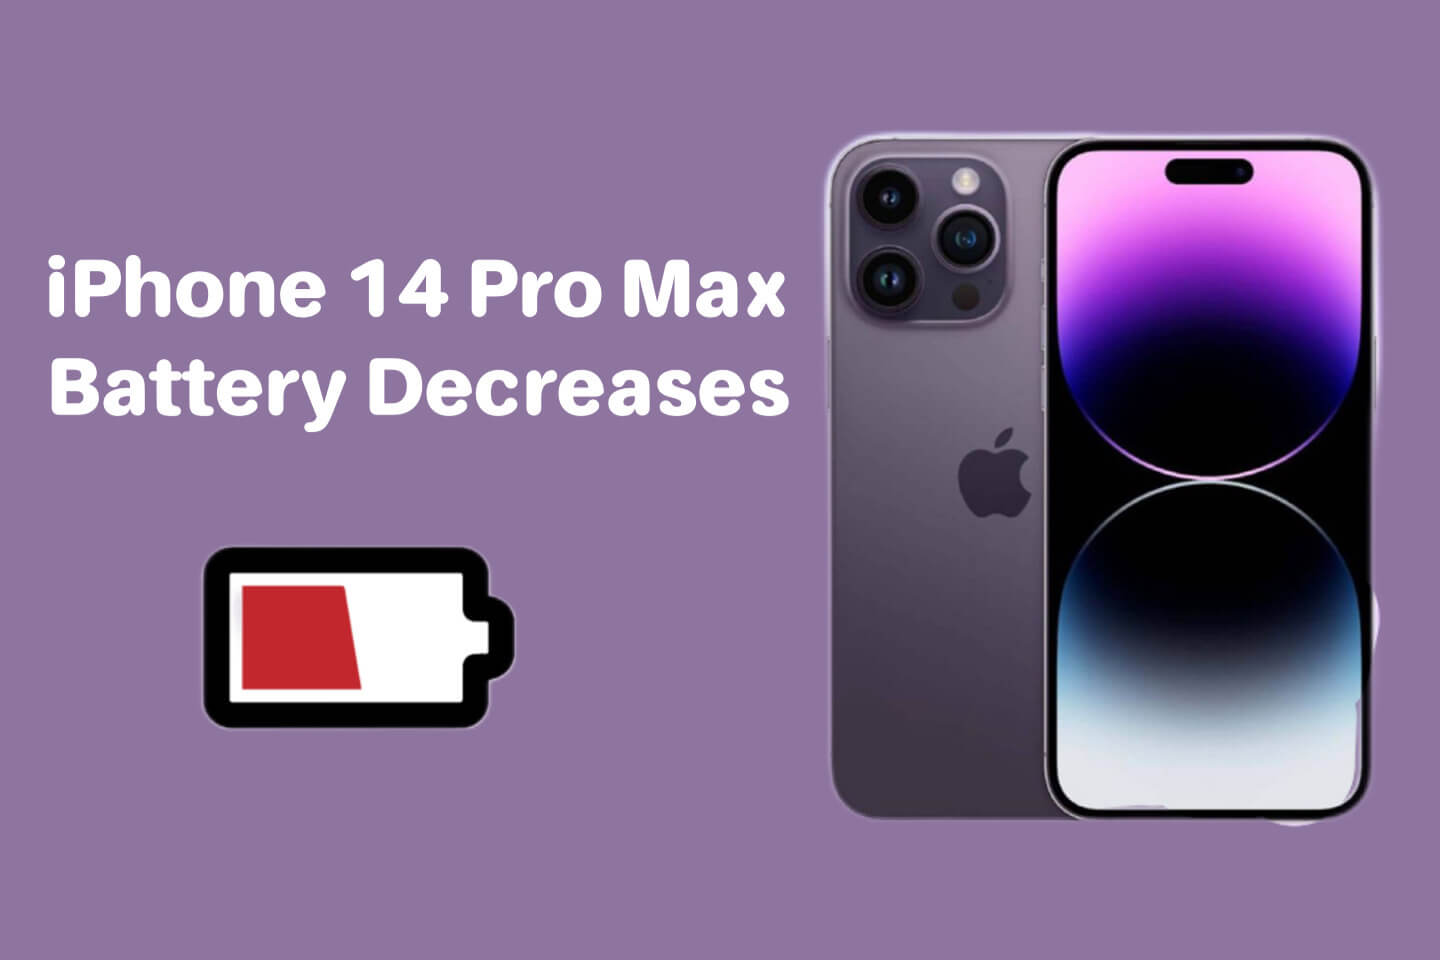 Shock! iPhone 14 Pro Max Battery Does Not Increase but Decrease!